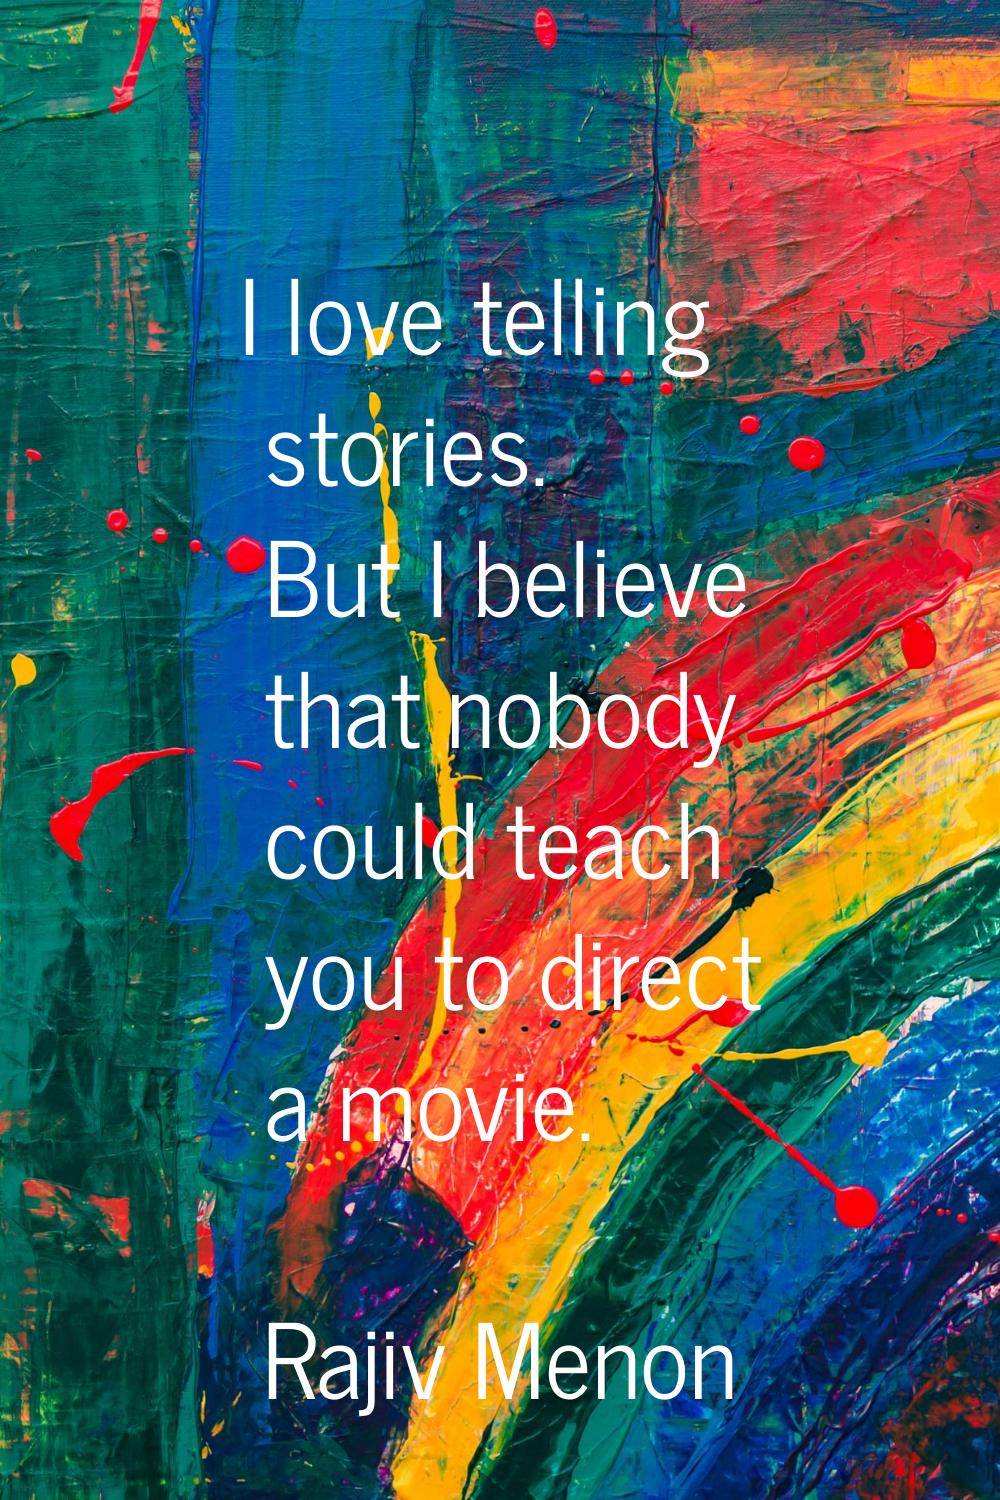 I love telling stories. But I believe that nobody could teach you to direct a movie.